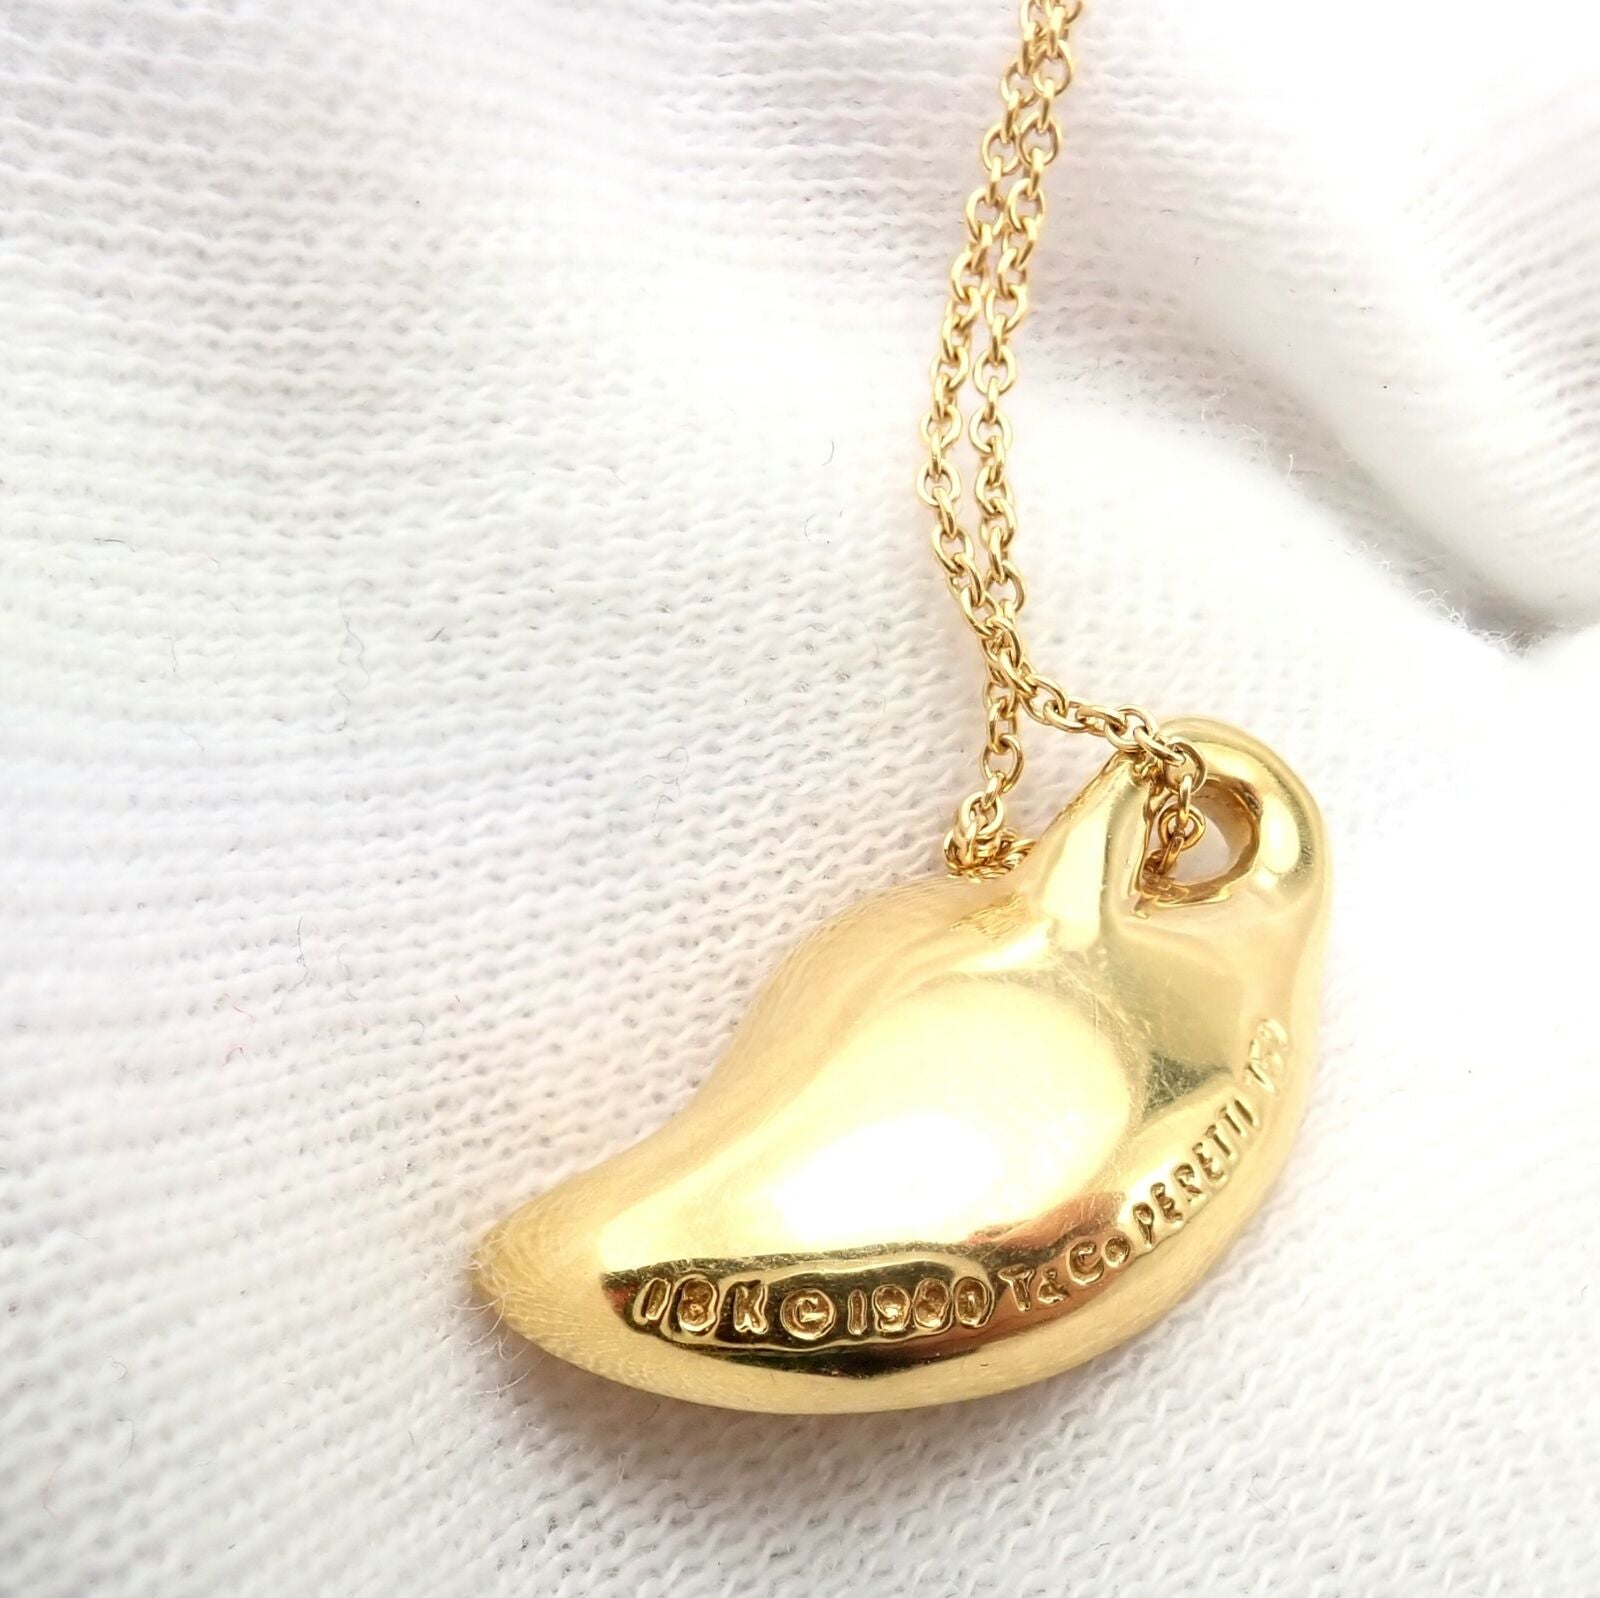 Tiffany & Co. Jewelry & Watches:Fine Jewelry:Necklaces & Pendants Authentic! Vintage Tiffany & Co Peretti 18k Gold Leaf Pendant Necklace 1980